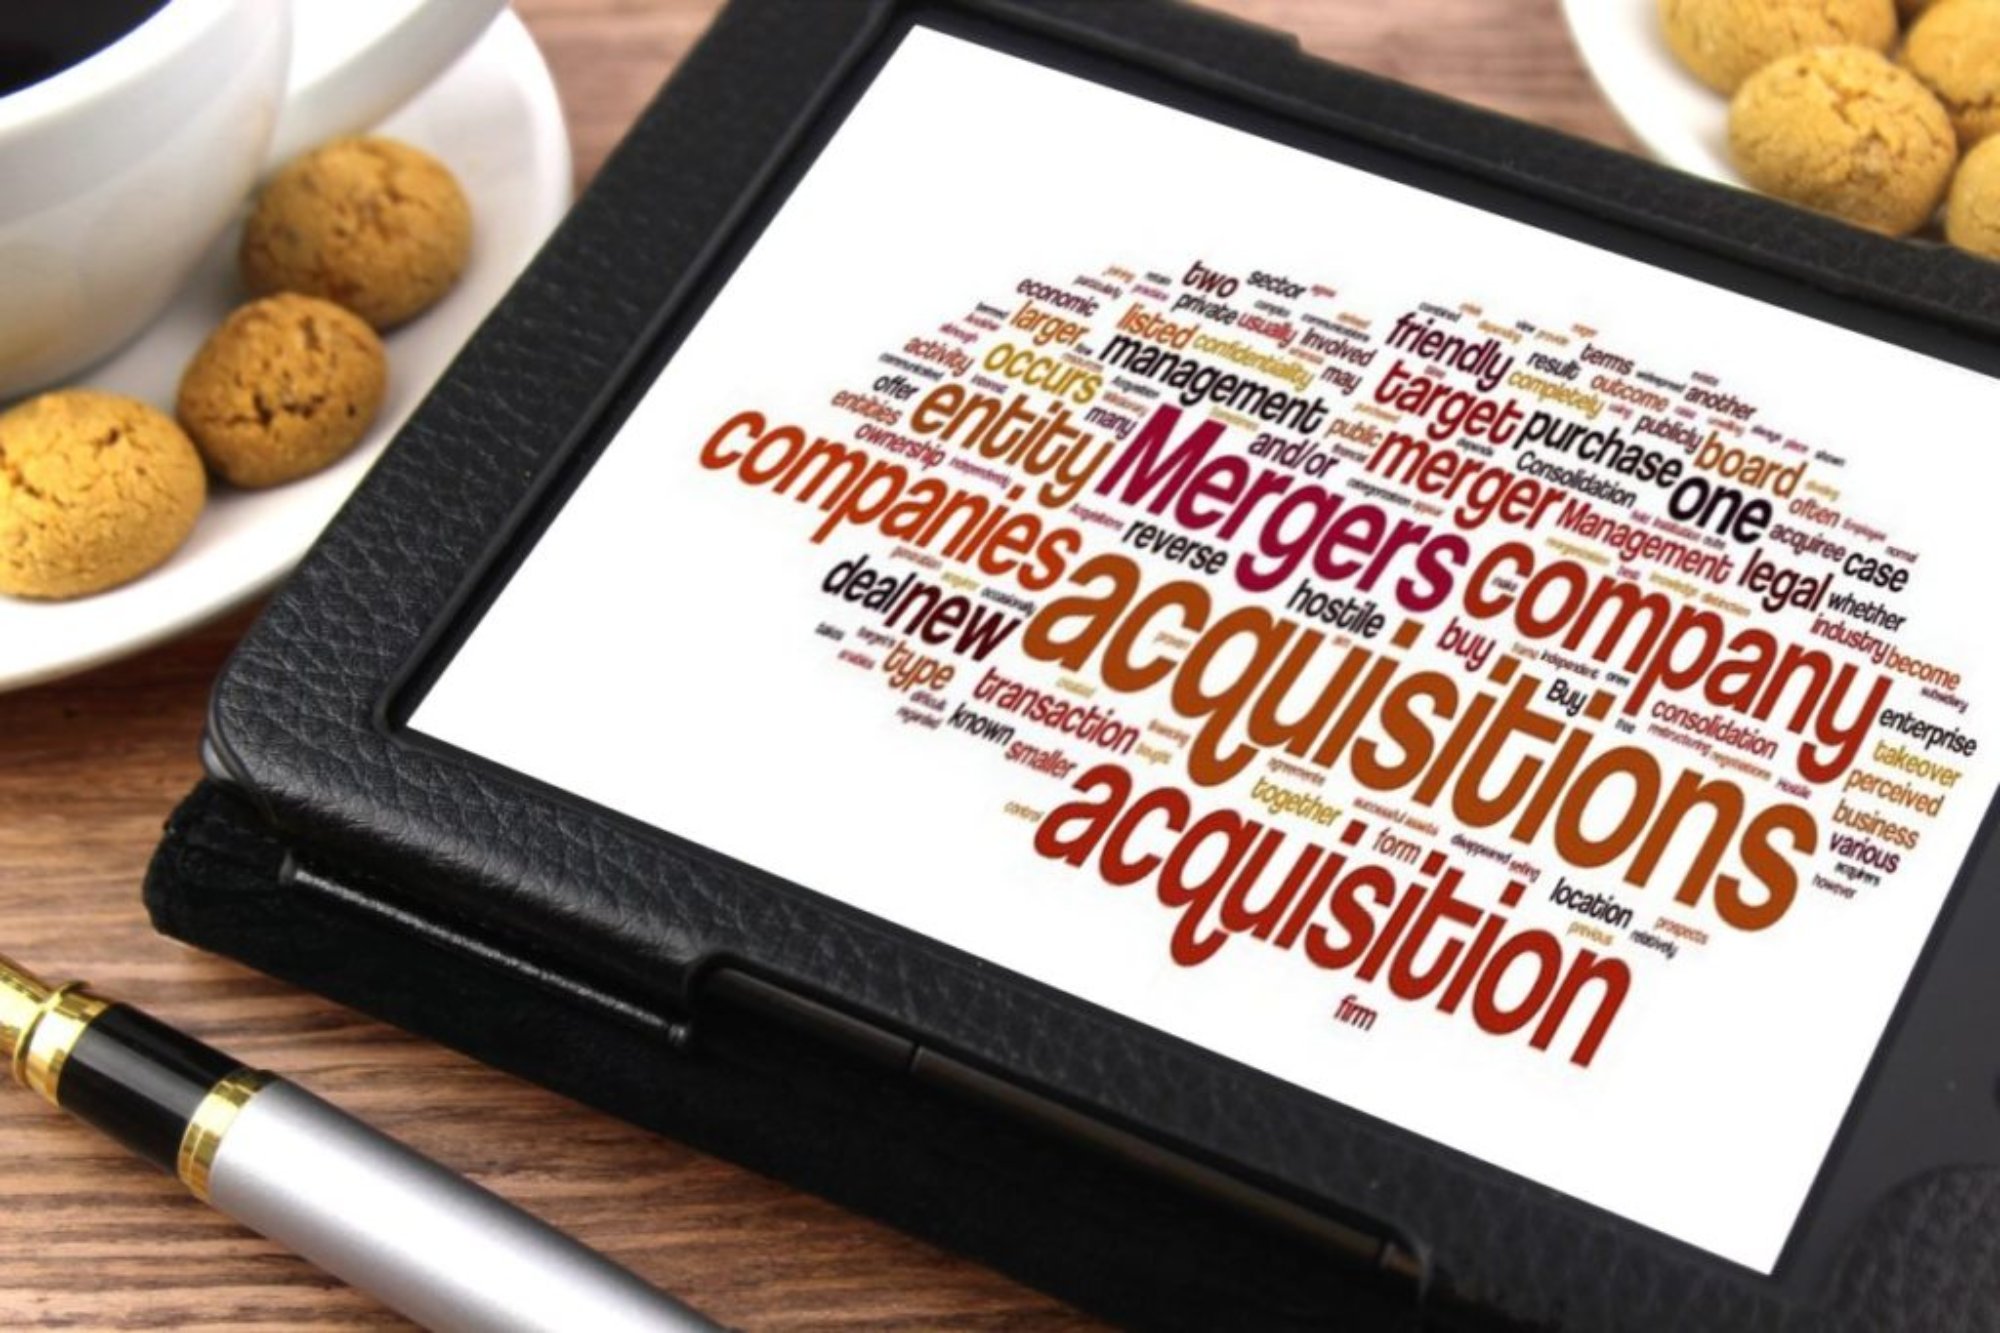 M&A, mergers & acquistions